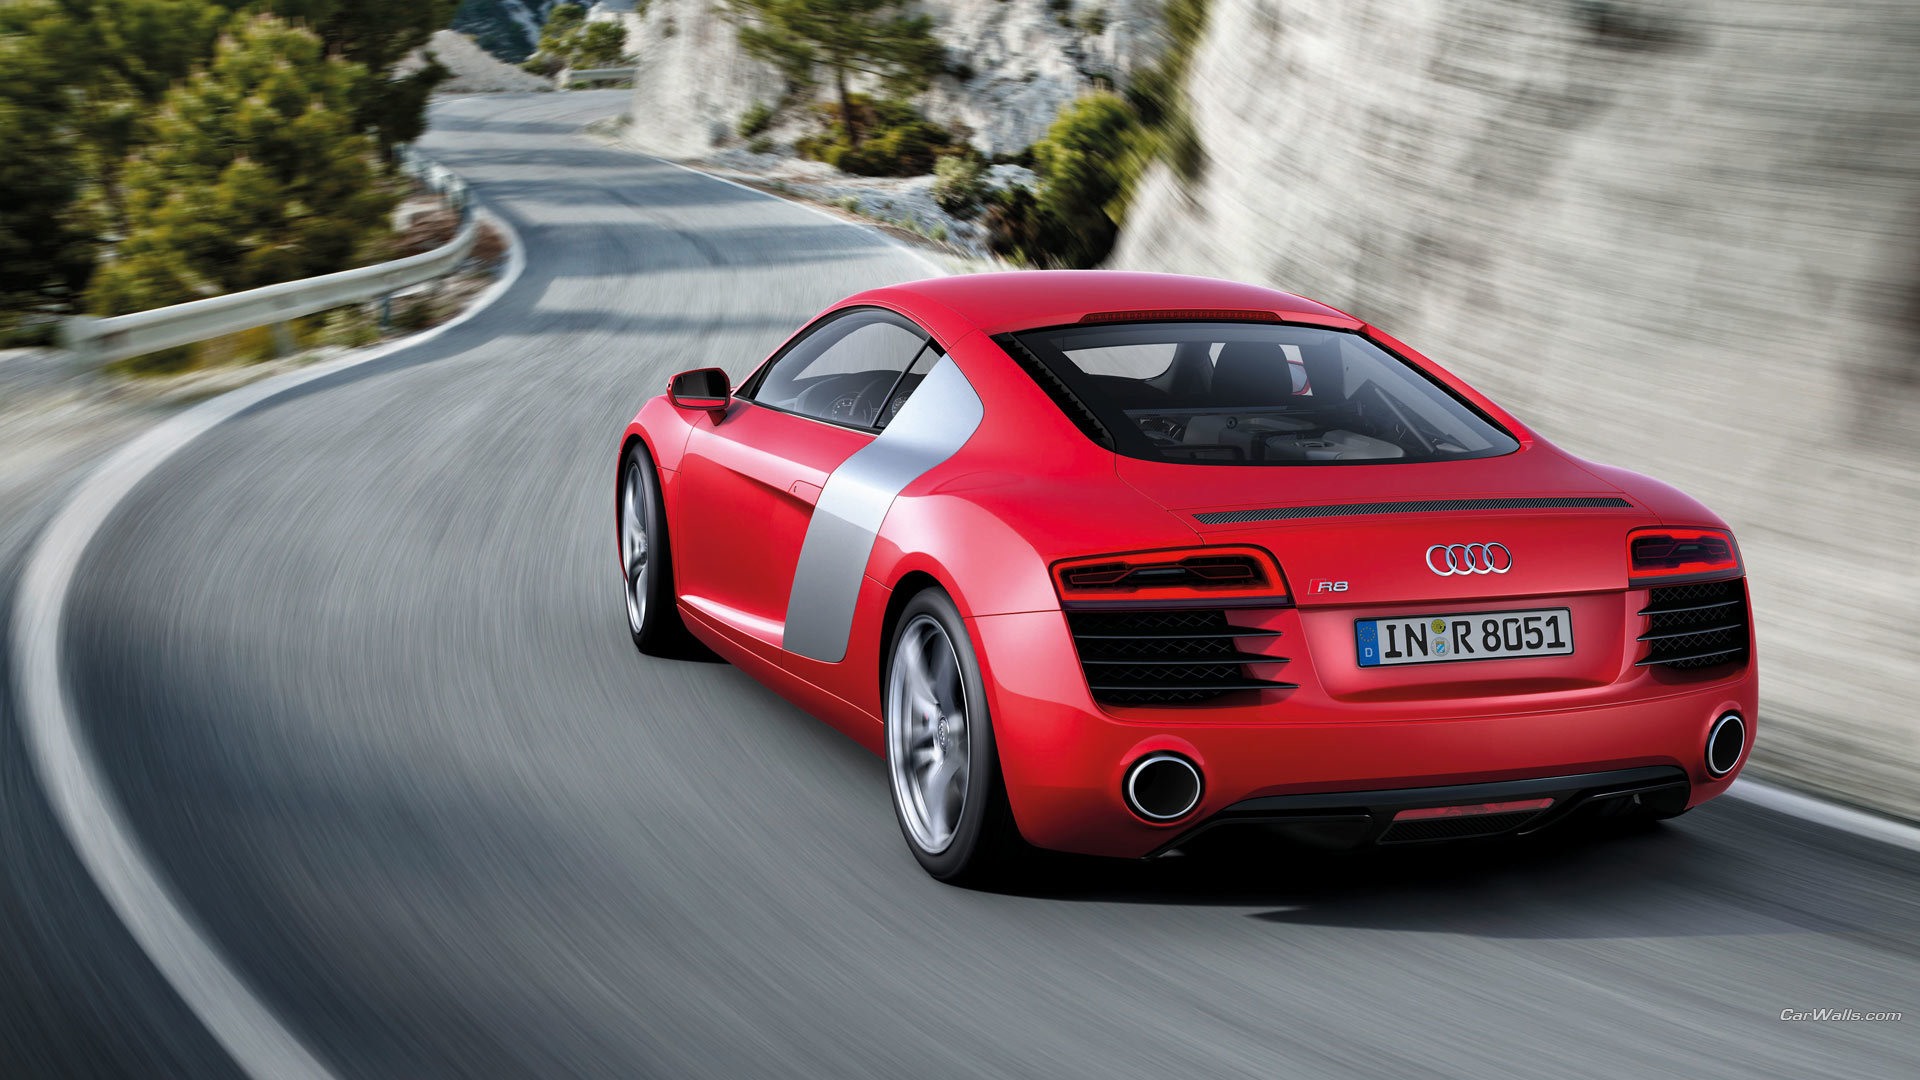 Best Audi R8 wallpaper ID:452666 for High Resolution hd 1080p computer